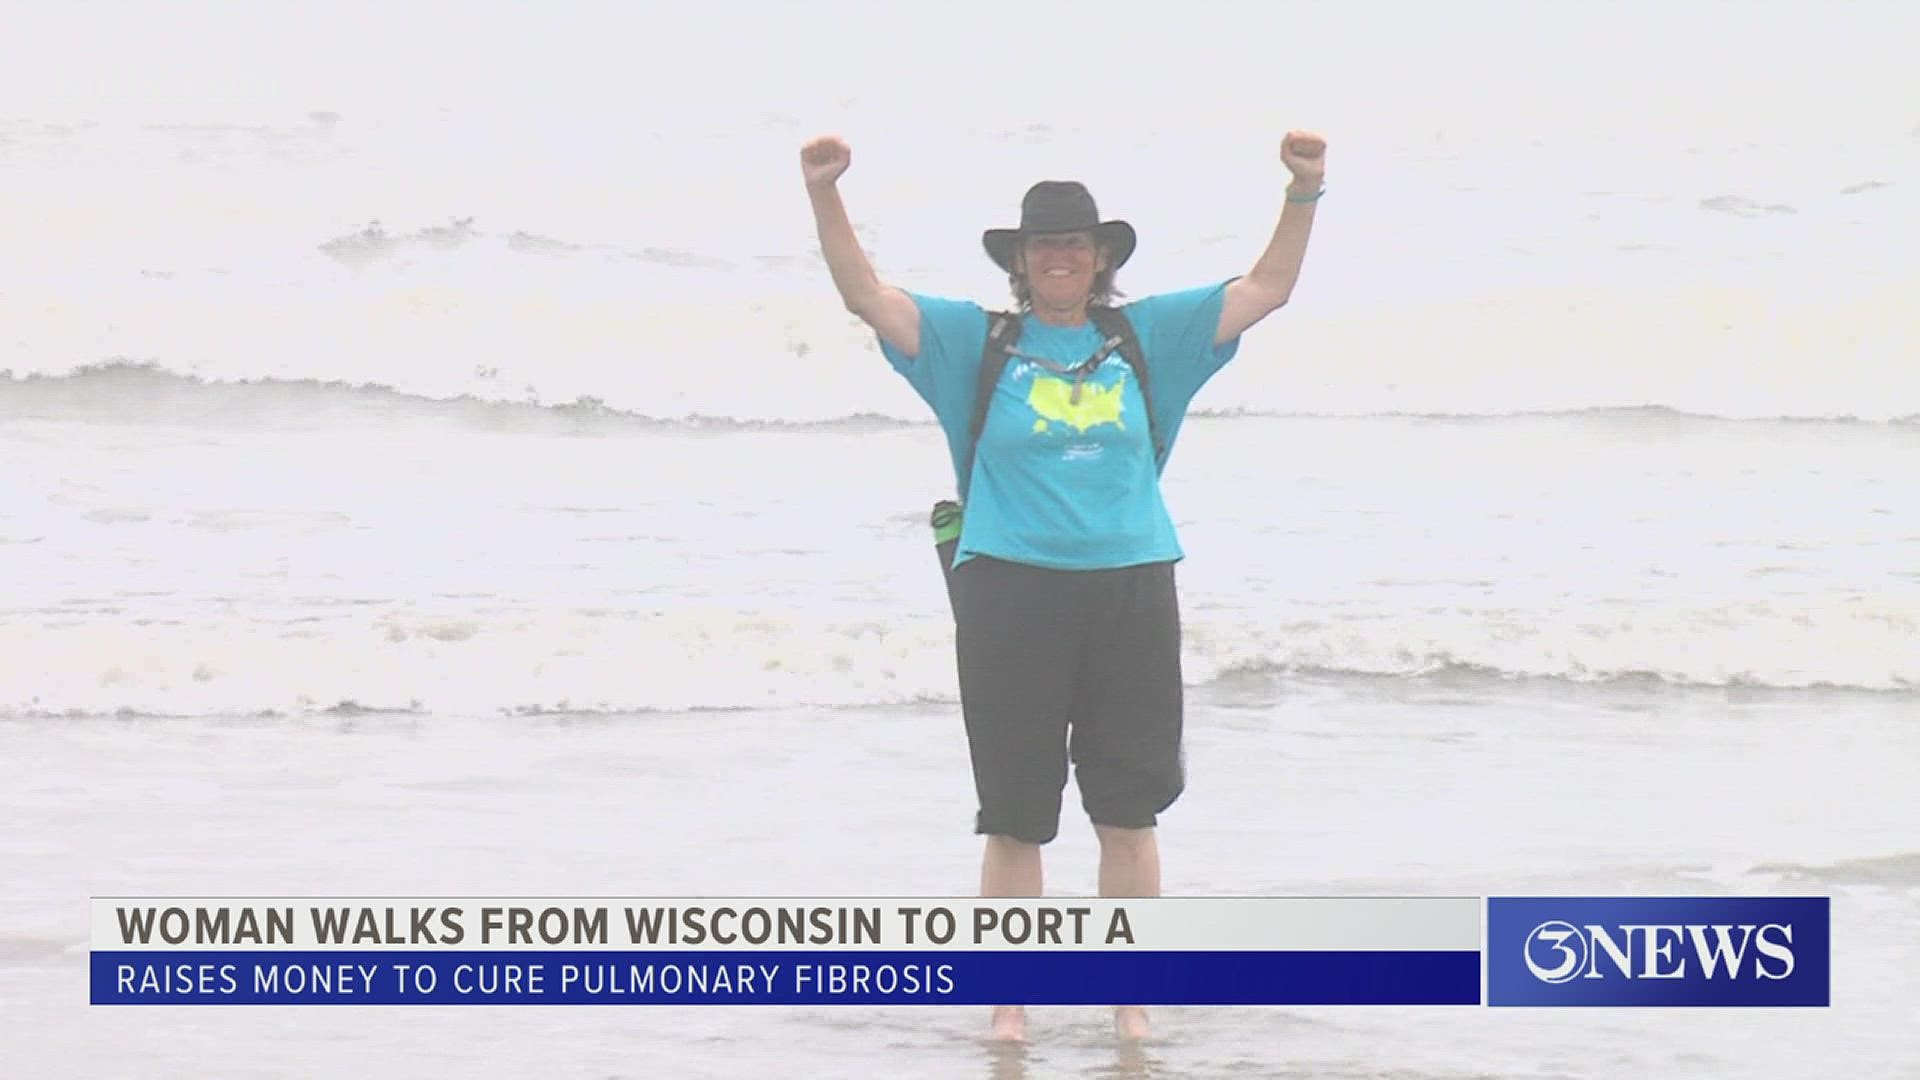 Mary Hesch walked more than 1,400 miles to help raise money to cure pulmonary fibrosis.